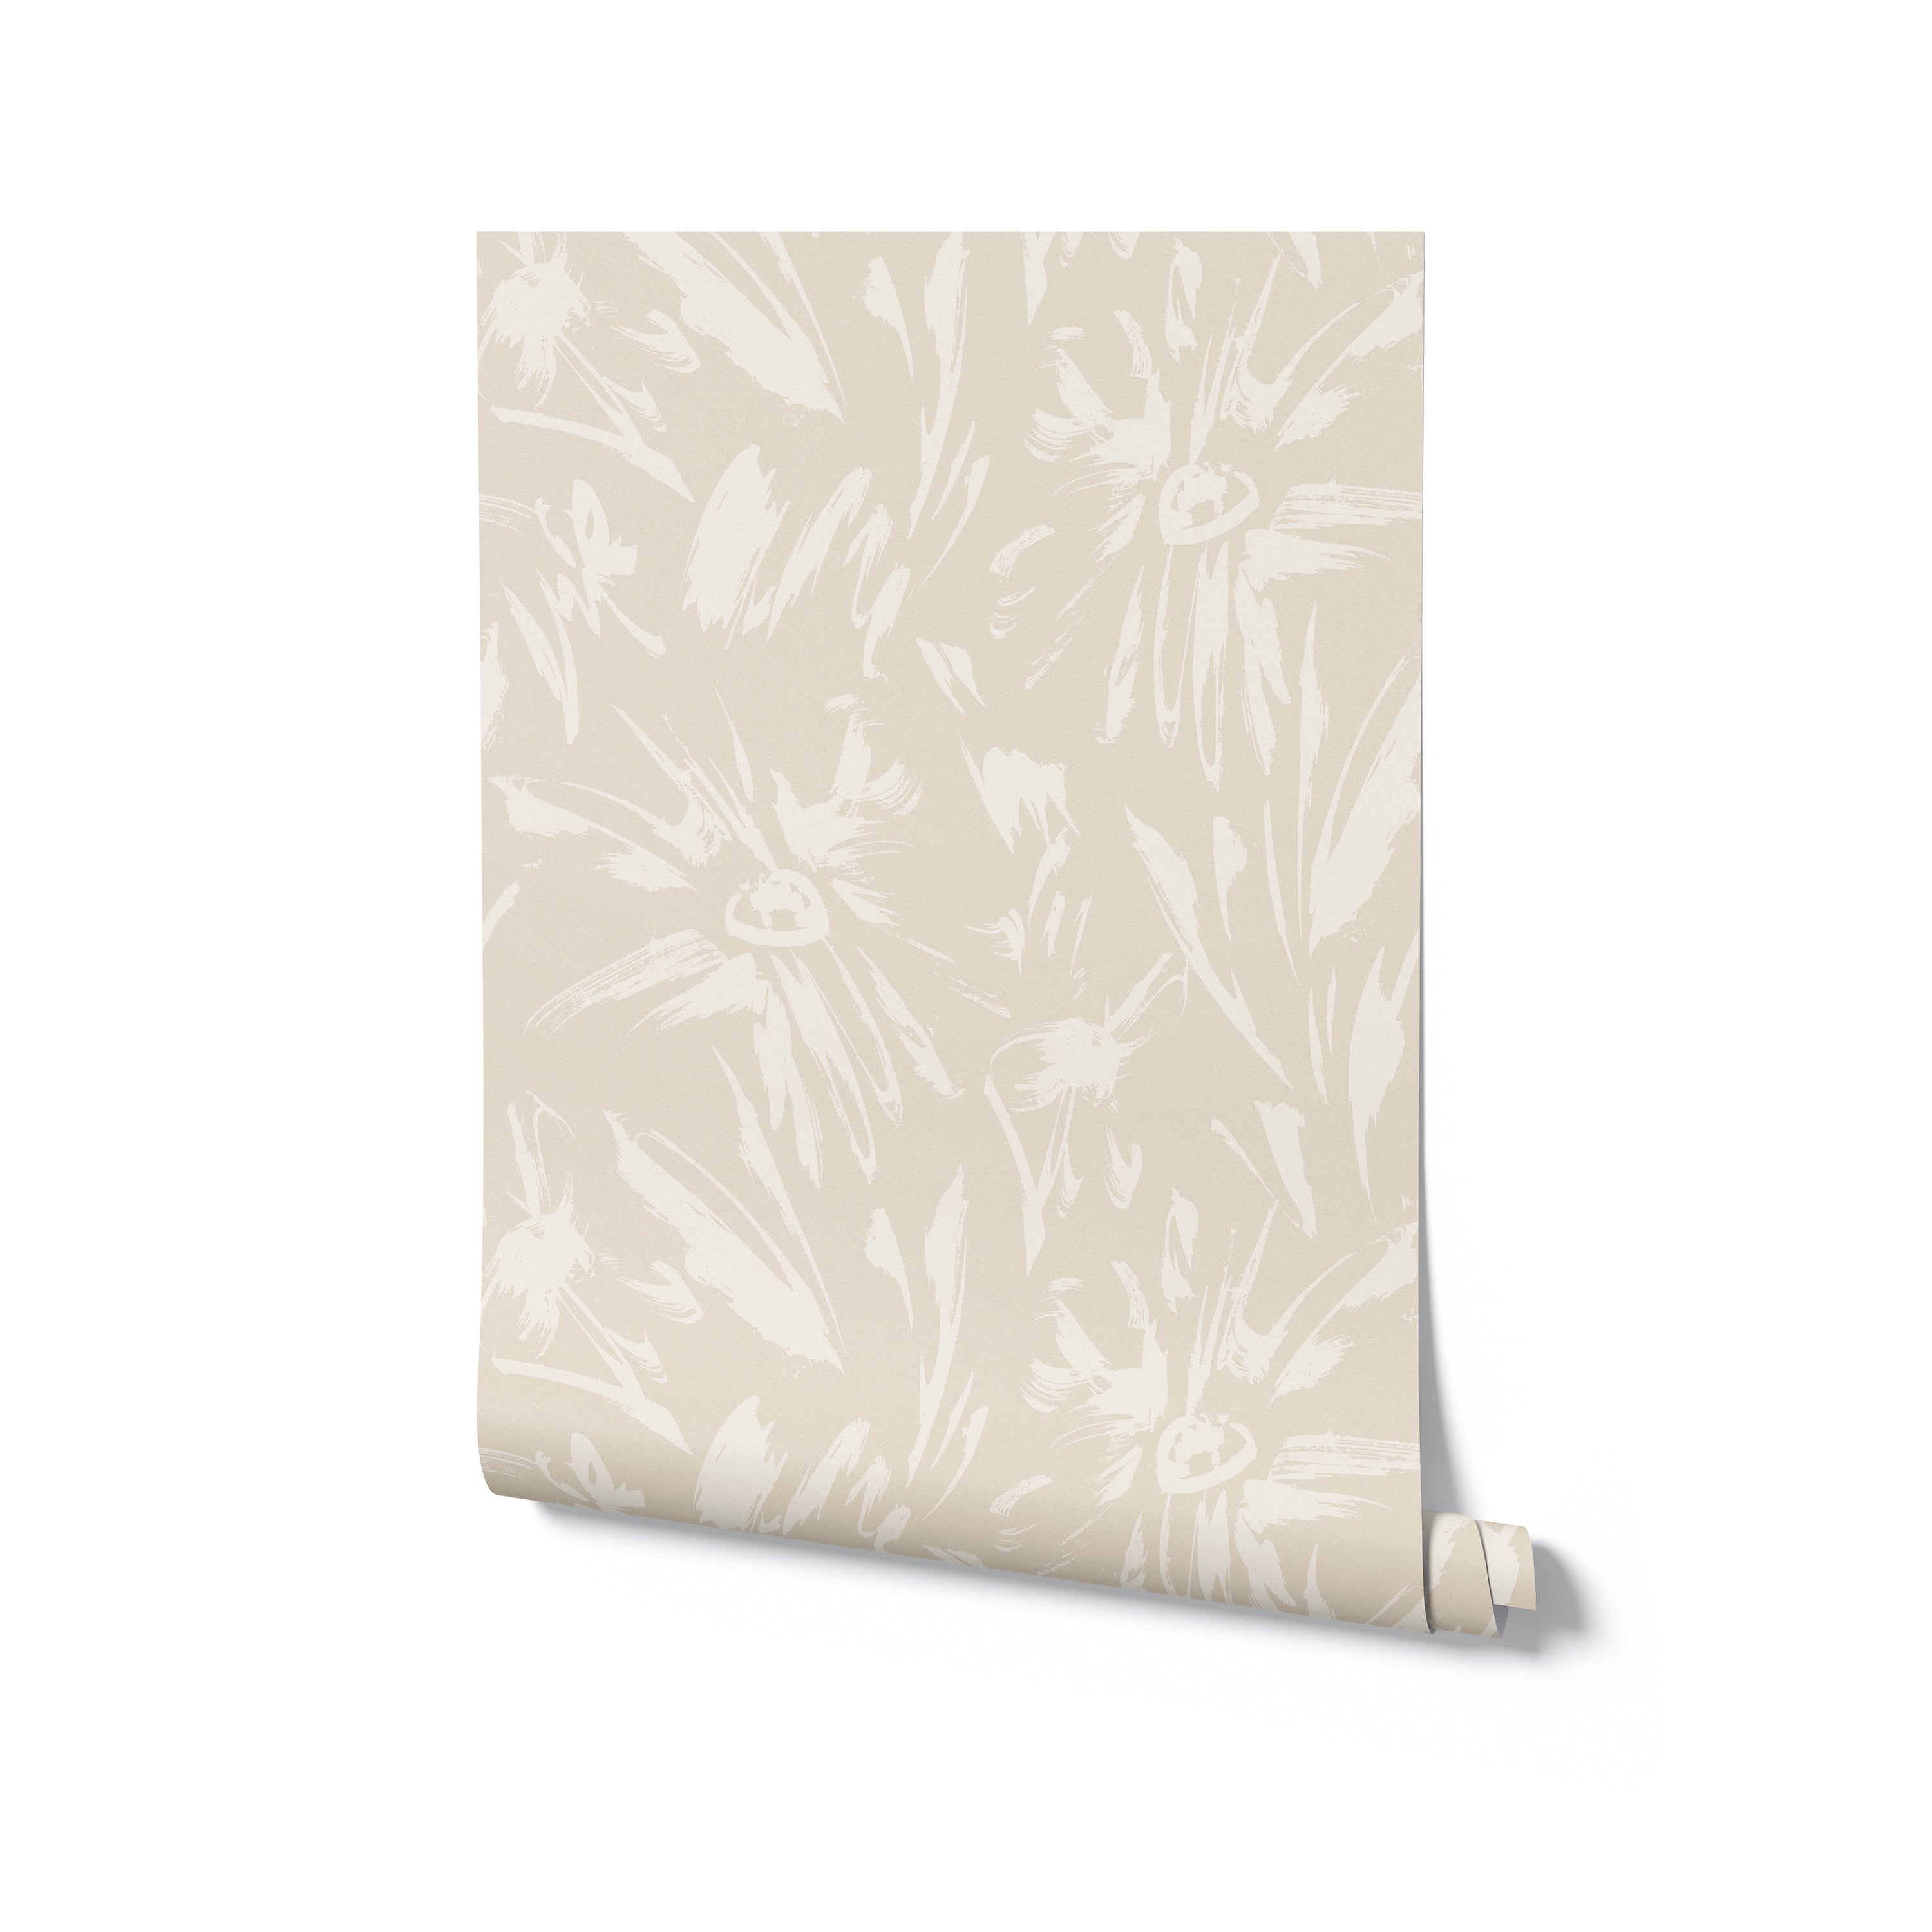 A roll of Ecru Floral Sketch Wallpaper - 25", partially unrolled to showcase the gentle floral sketch design in beige on a soft ecru backdrop. This wallpaper brings a touch of nature's whimsy and a neutral palette that easily integrates into a variety of interior styles